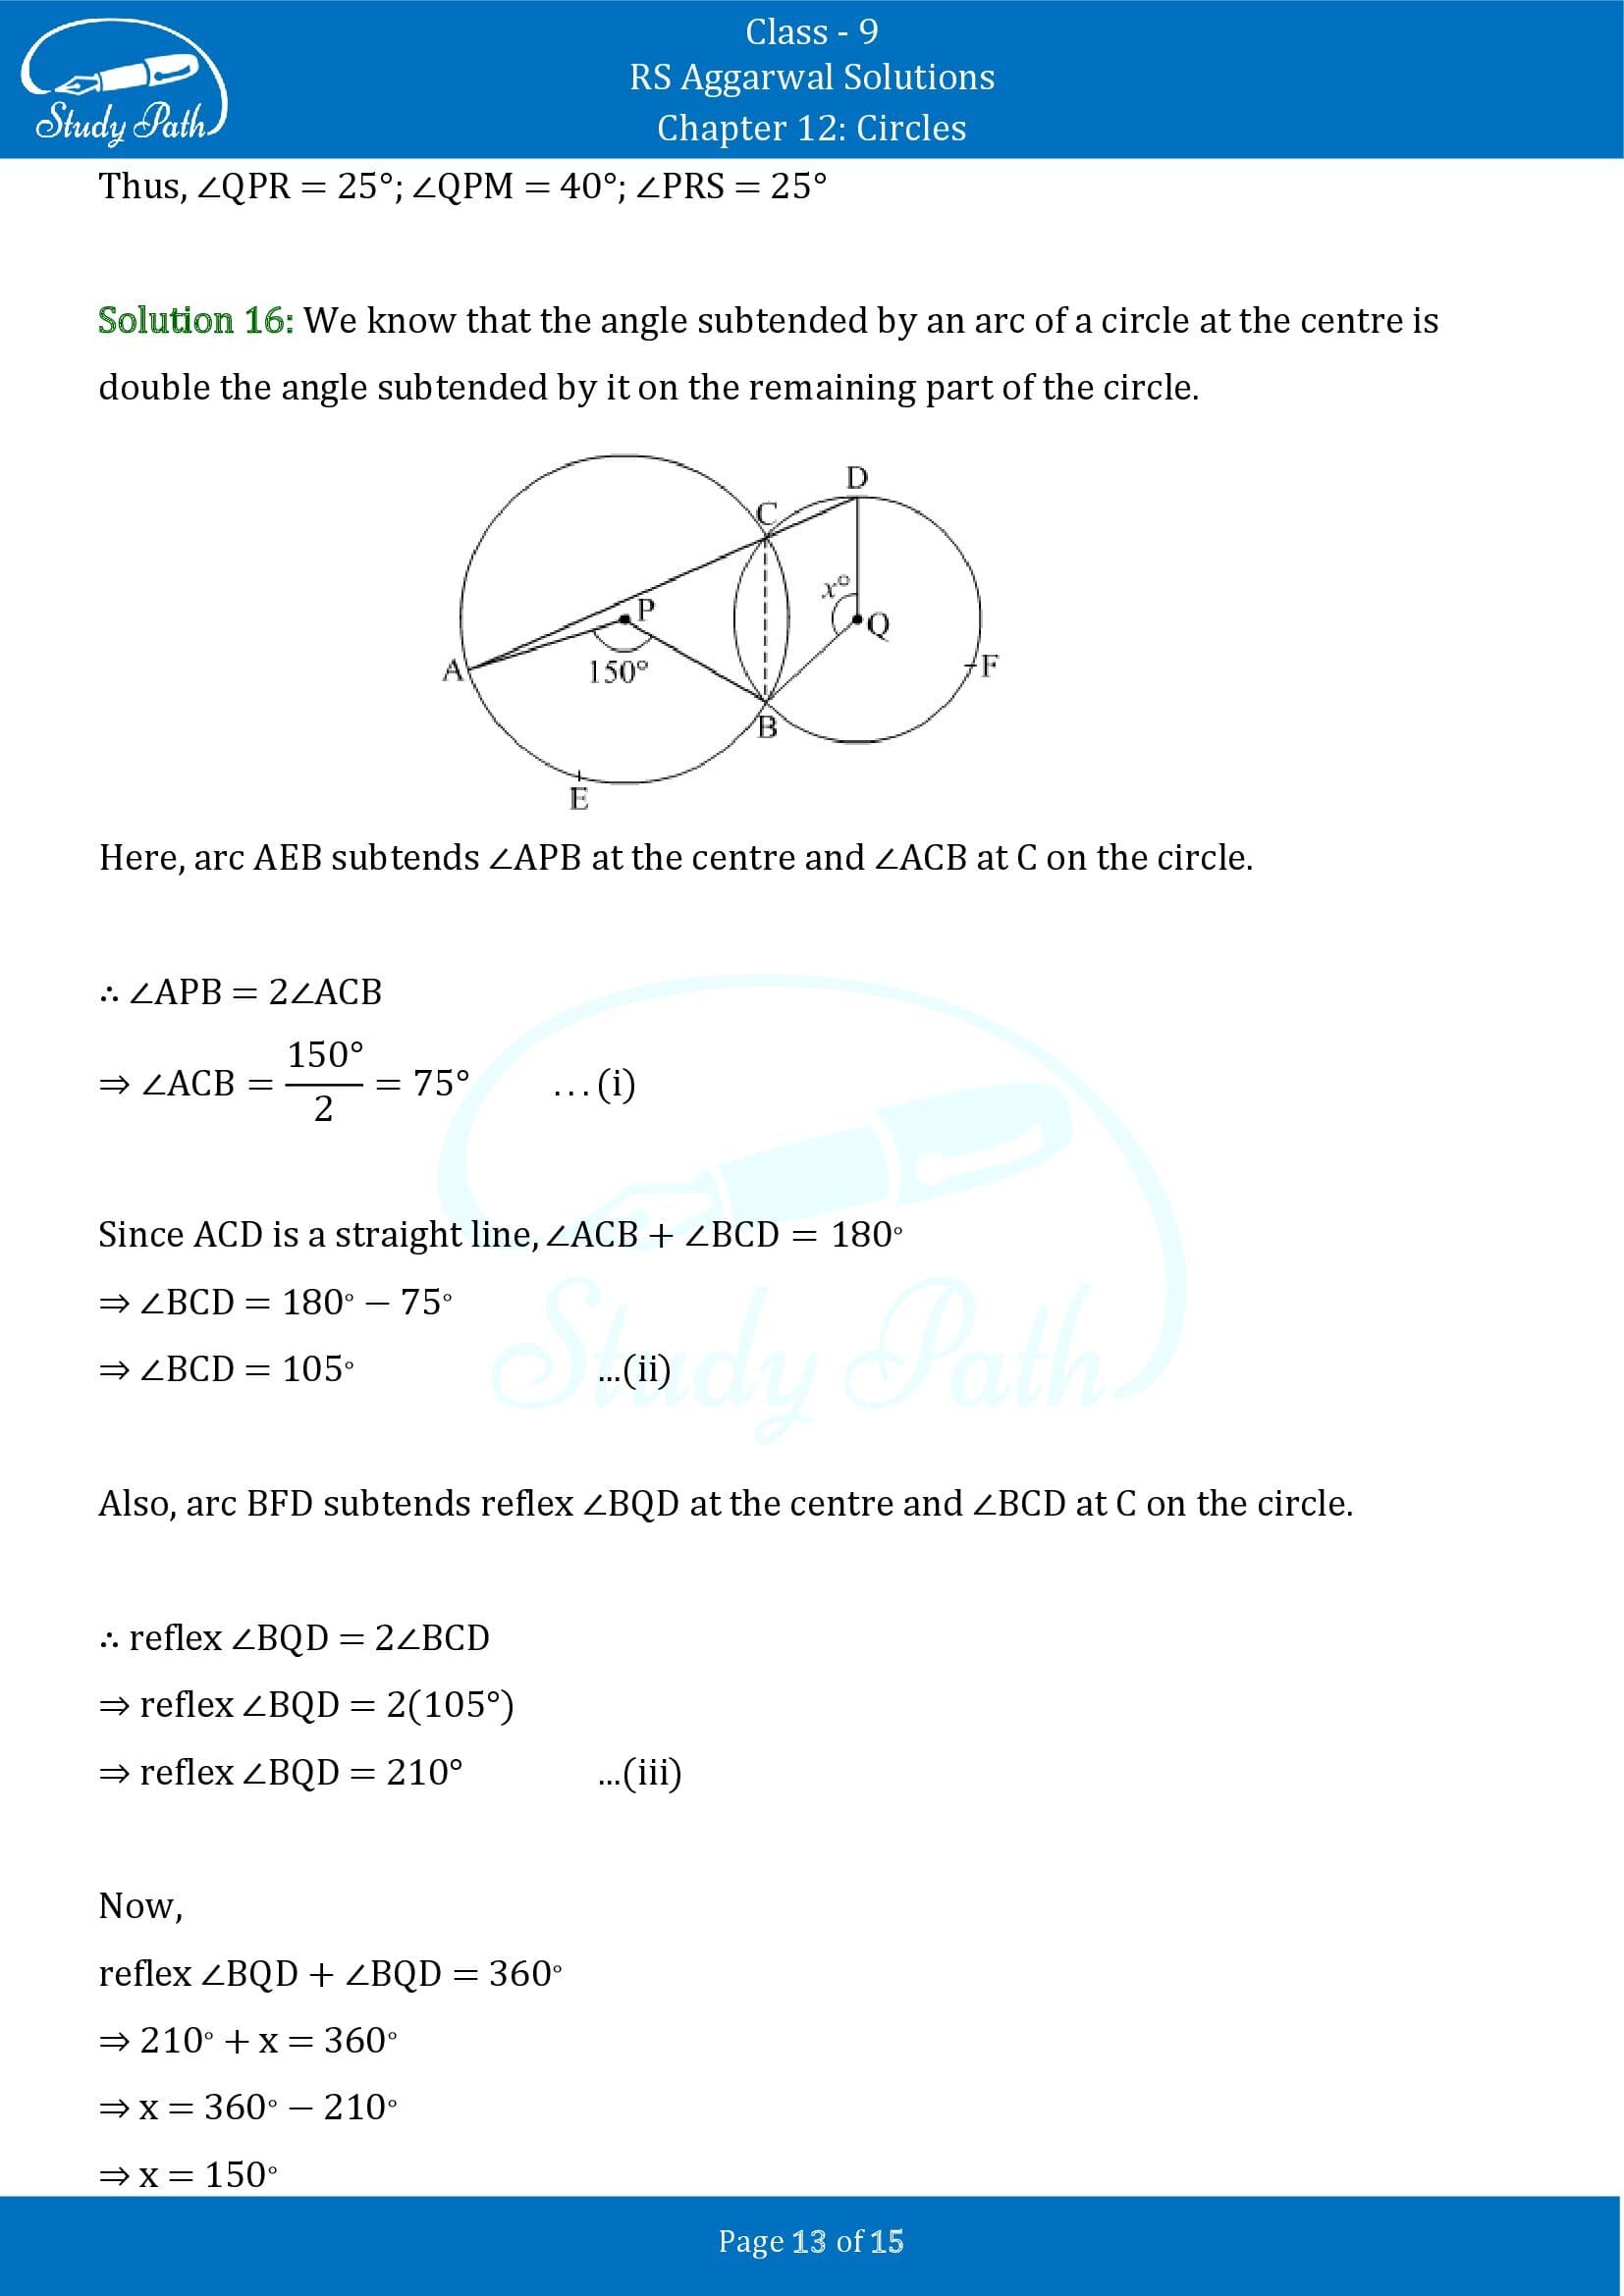 RS Aggarwal Solutions Class 9 Chapter 12 Circles Exercise 12B 00013